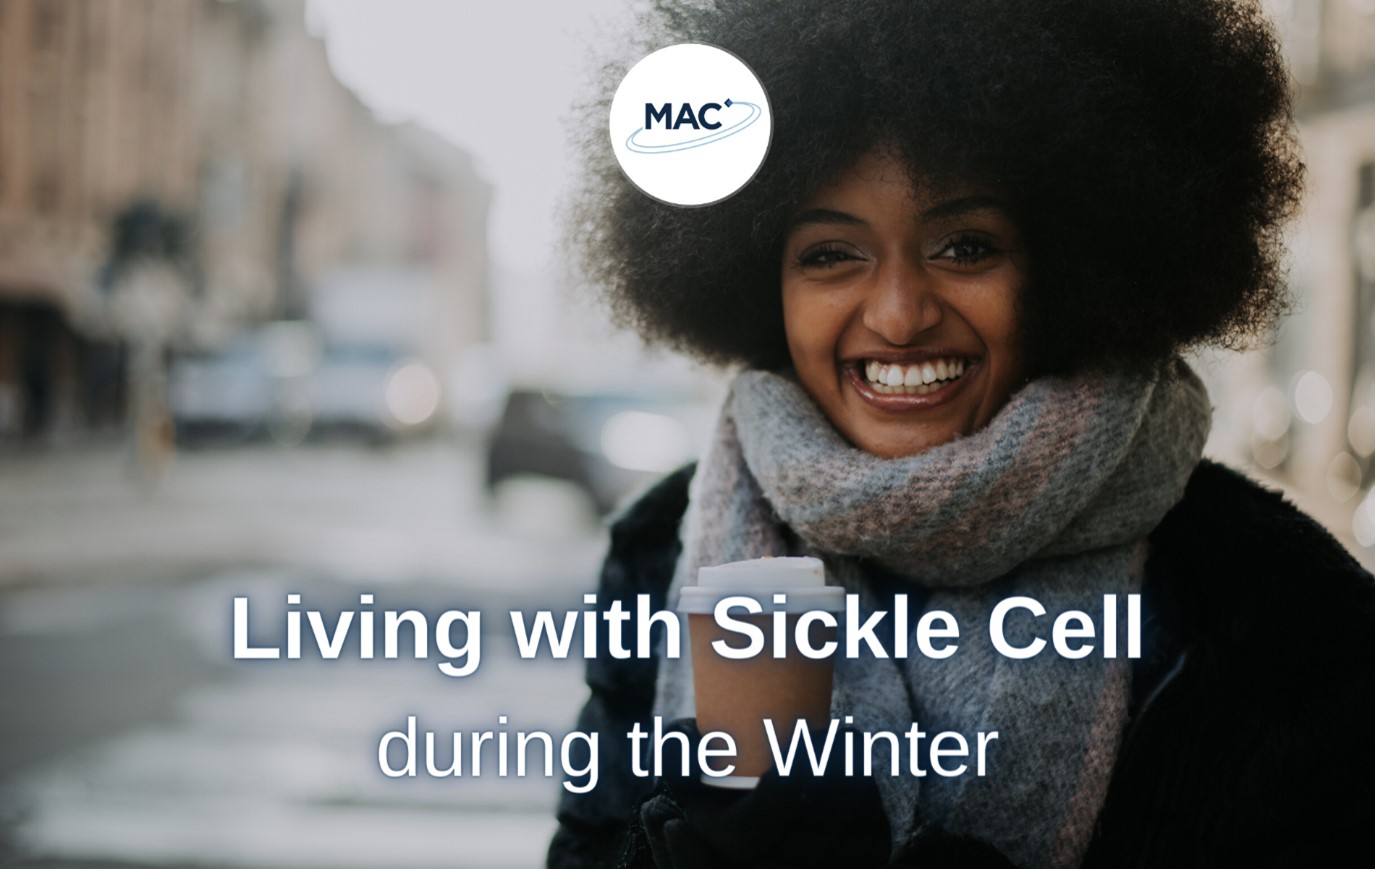 Living with sickle cell during the winter